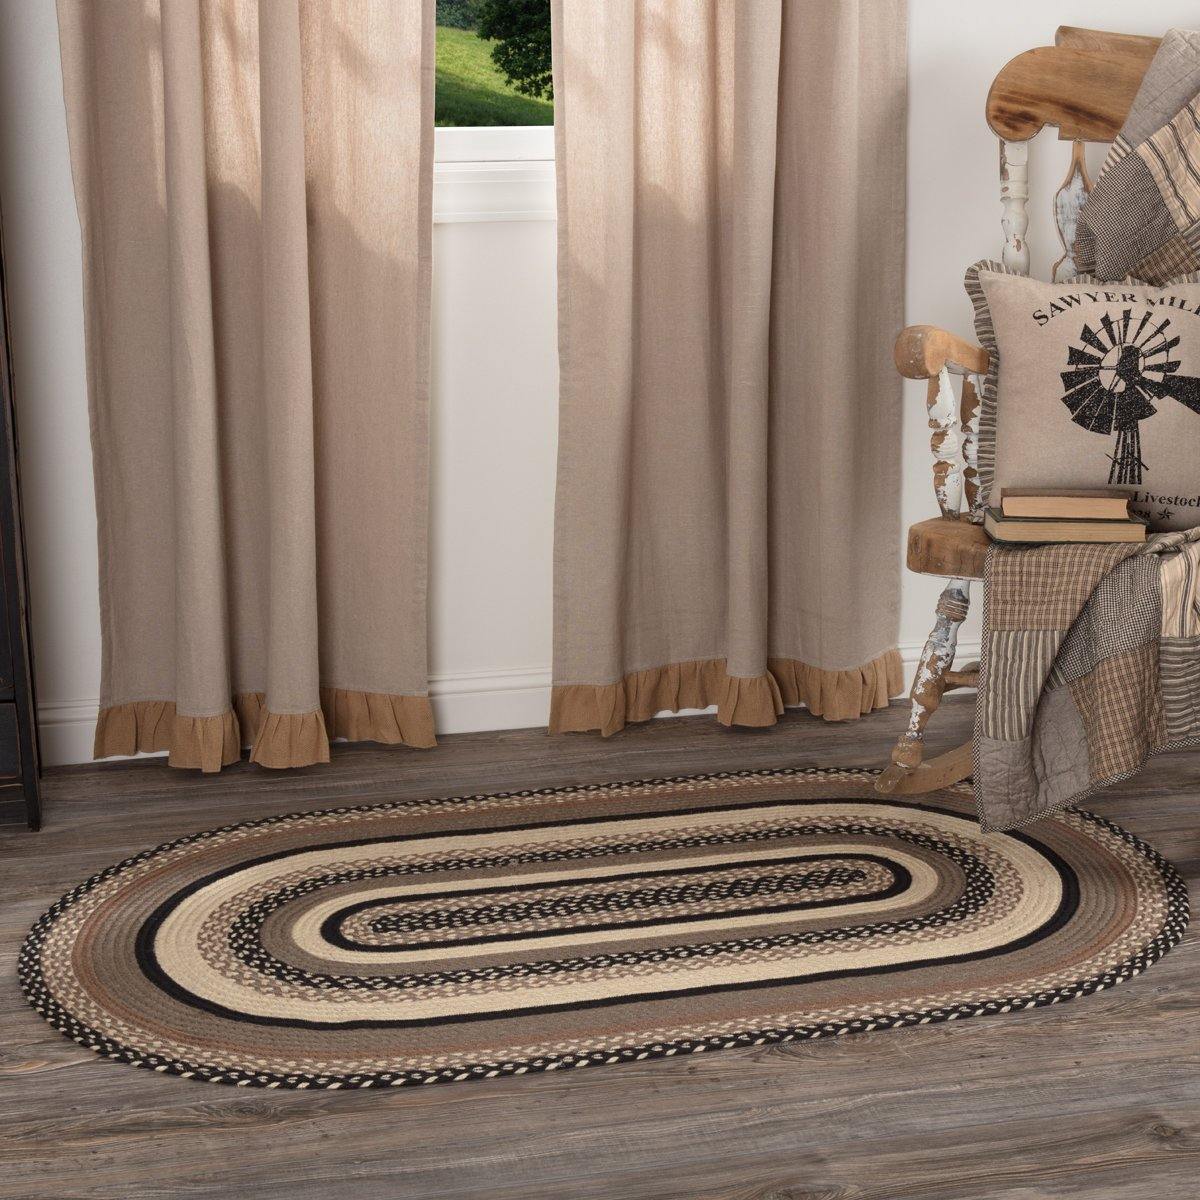 Sawyer Mill Charcoal Jute Braided Rug Oval 3'x5' with Rug Pad VHC Brands - The Fox Decor